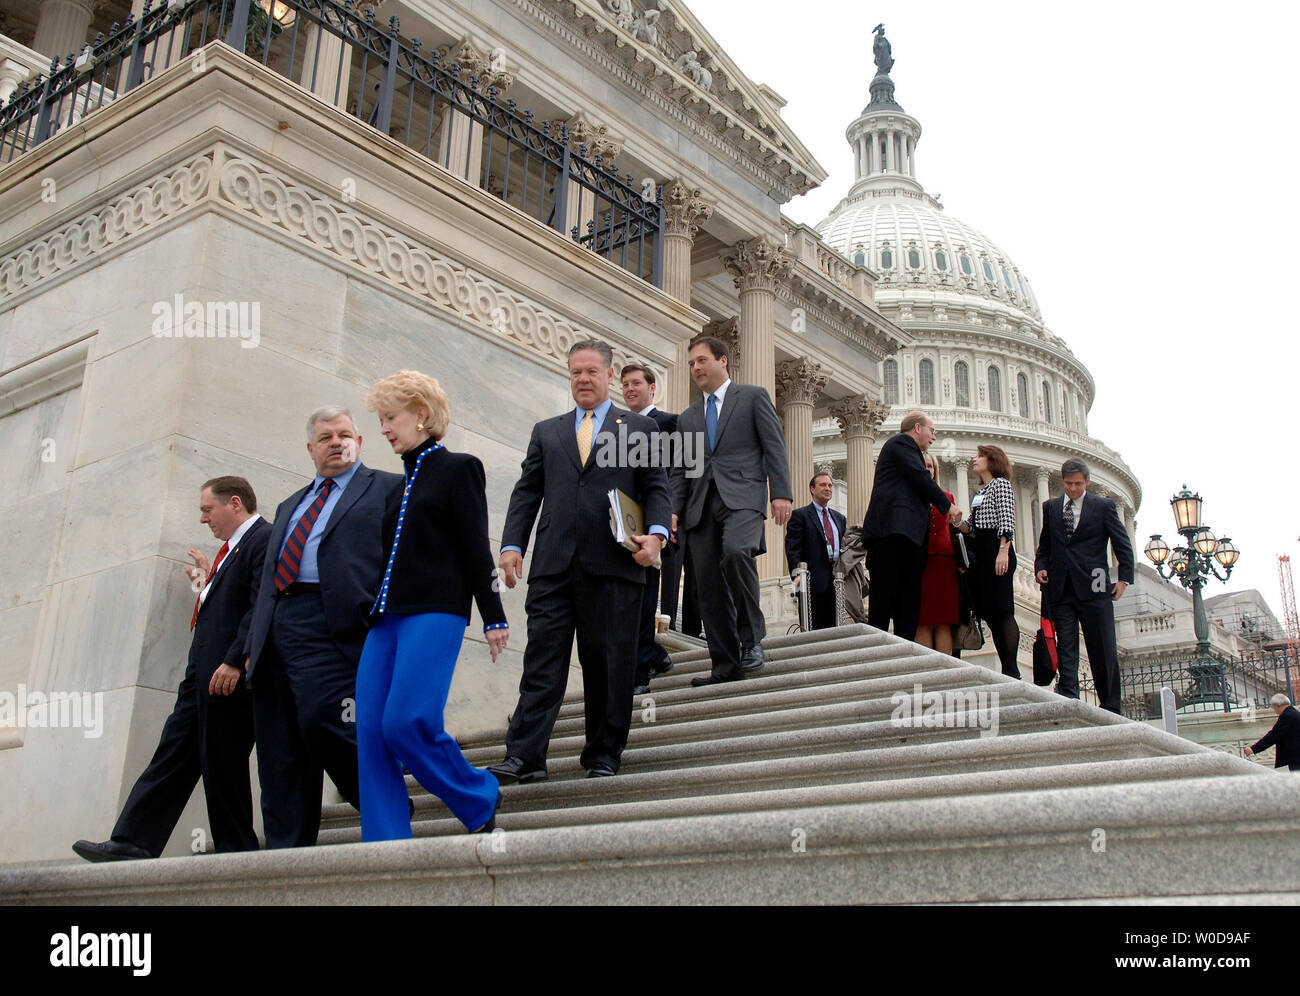 Members of the  freshman class of the 110th Congress leave the East Front Steps after a group photo, on the House side of the U.S. Capitol Building, in Washington on November 14, 2006. The Democrats take control of both the House and Senate in January.  (UPI Photo/Kevin Dietsch) Stock Photo